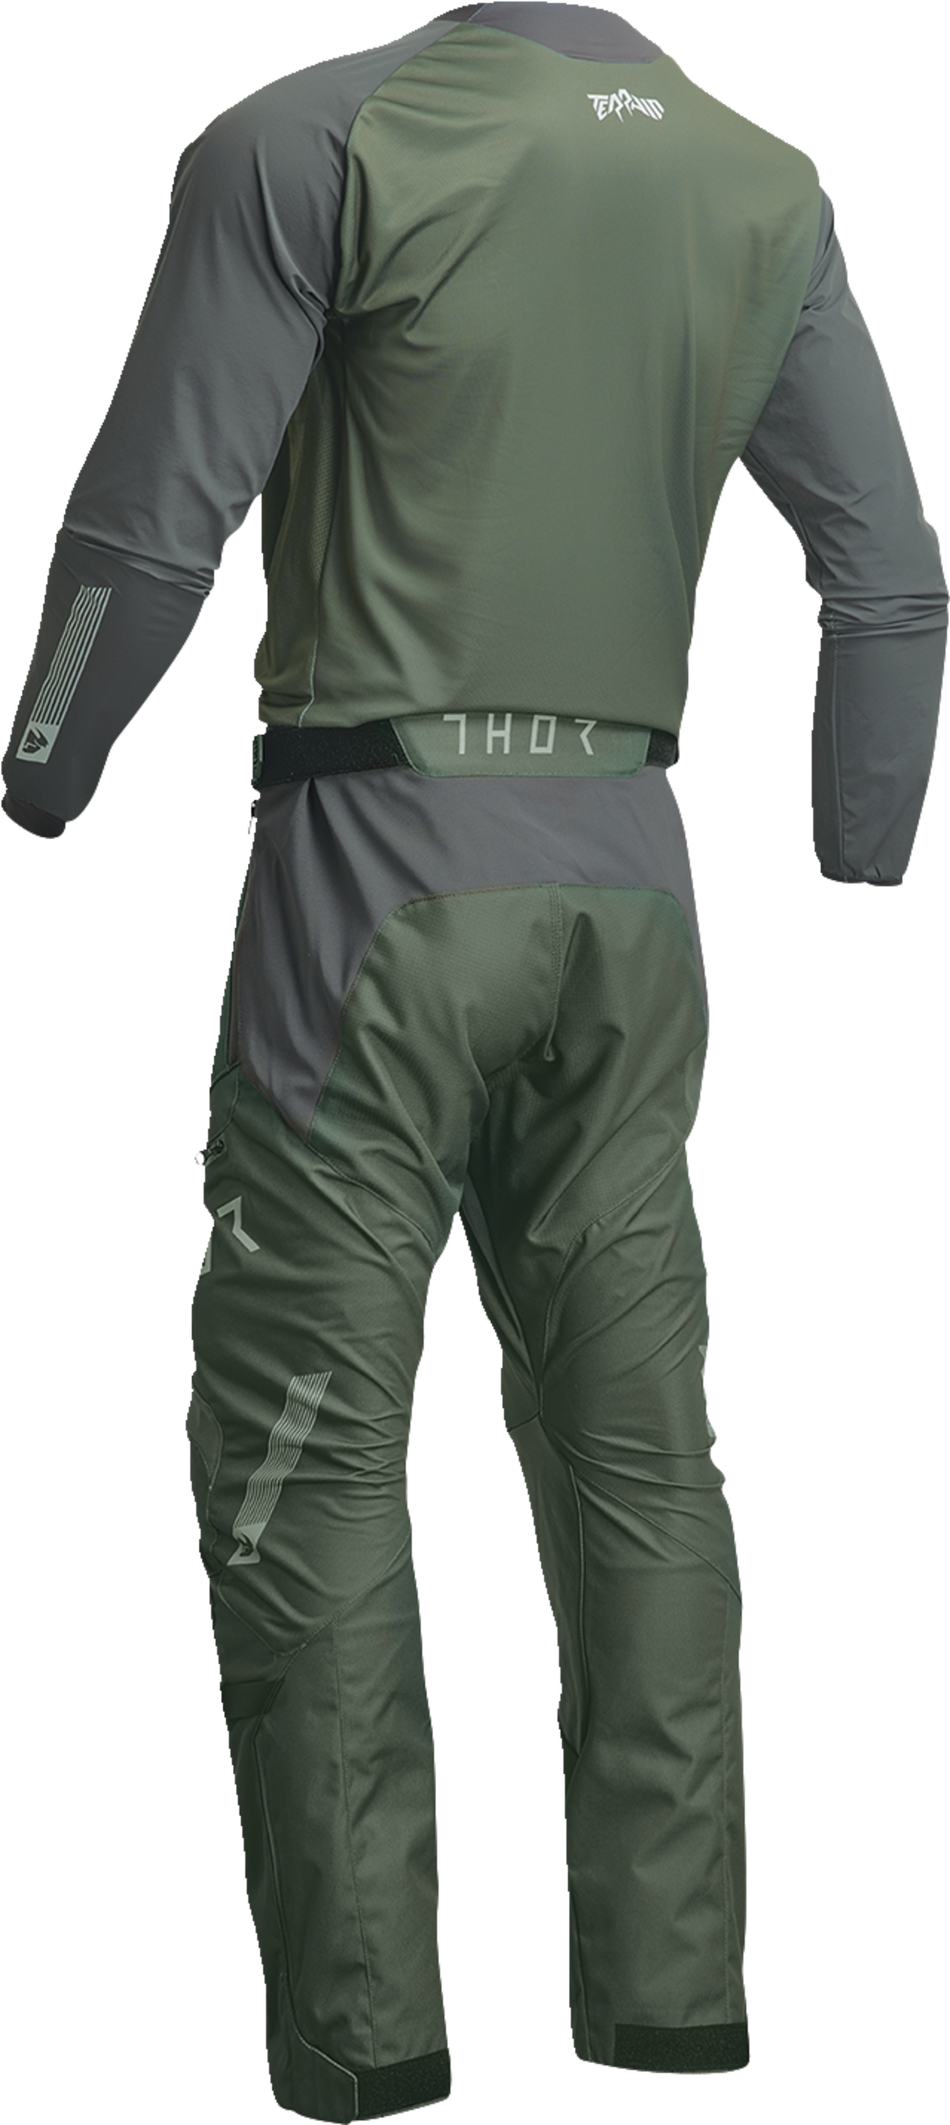 THOR Terrain Jersey - Army/Charcoal - 3XL 2910-7171